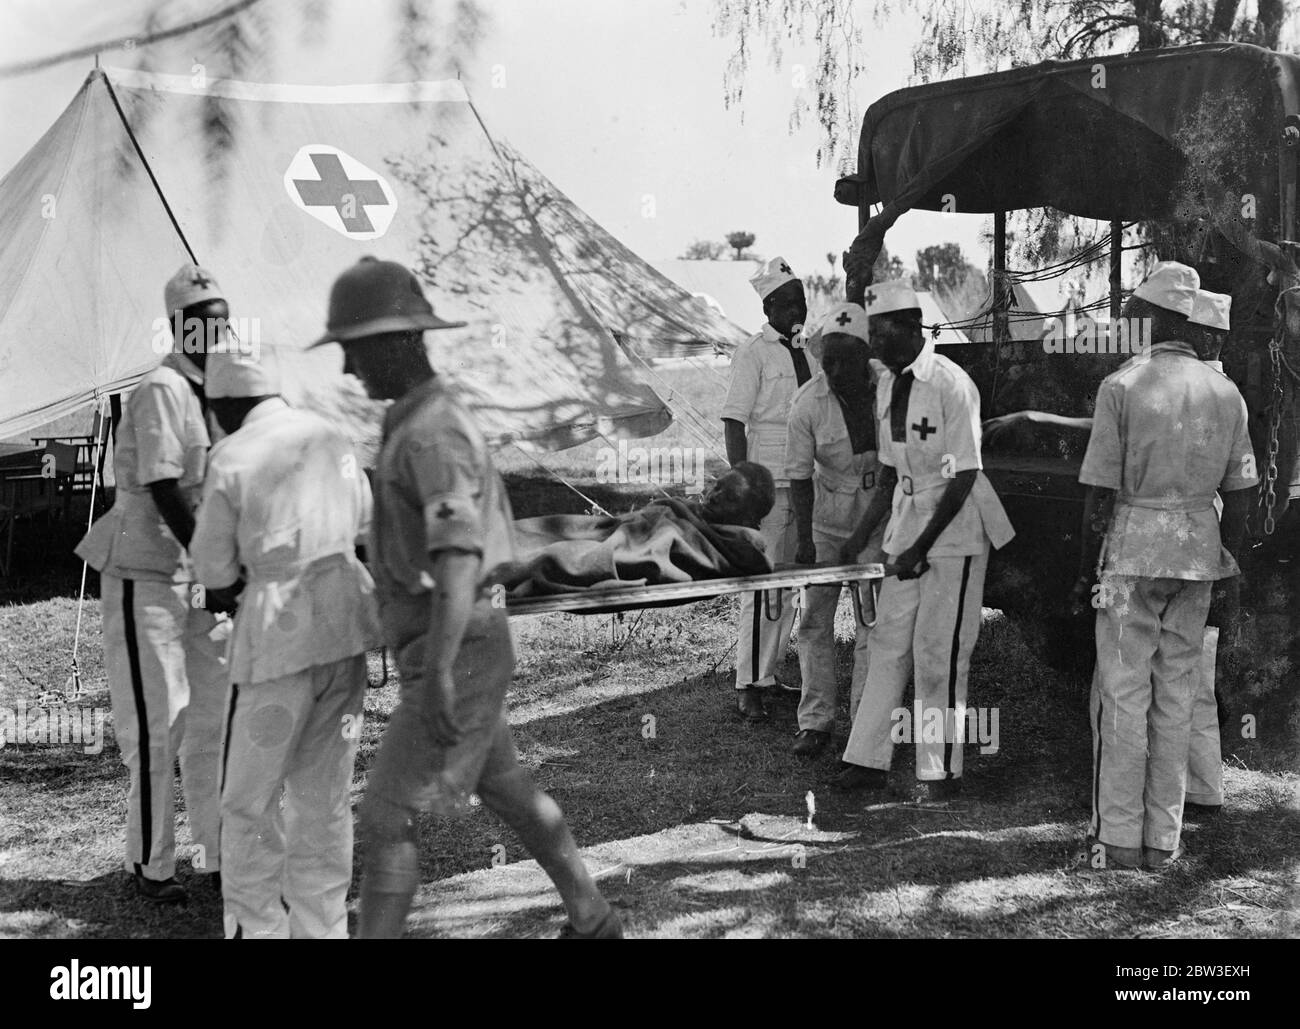 Casulties arrive at a British Field hospital . Abyssinians wounded in the fighting on the southern front arriving on stretchers at a British Red Cross field hospital near Harar . A fleet of motor ambulances is kept busy patrolling the battle zone for casulties . The doctors of the British Red Cross stations are assisted by natives from Kenya , British Somaliland and other British territories . 29 December 1935 Stock Photo